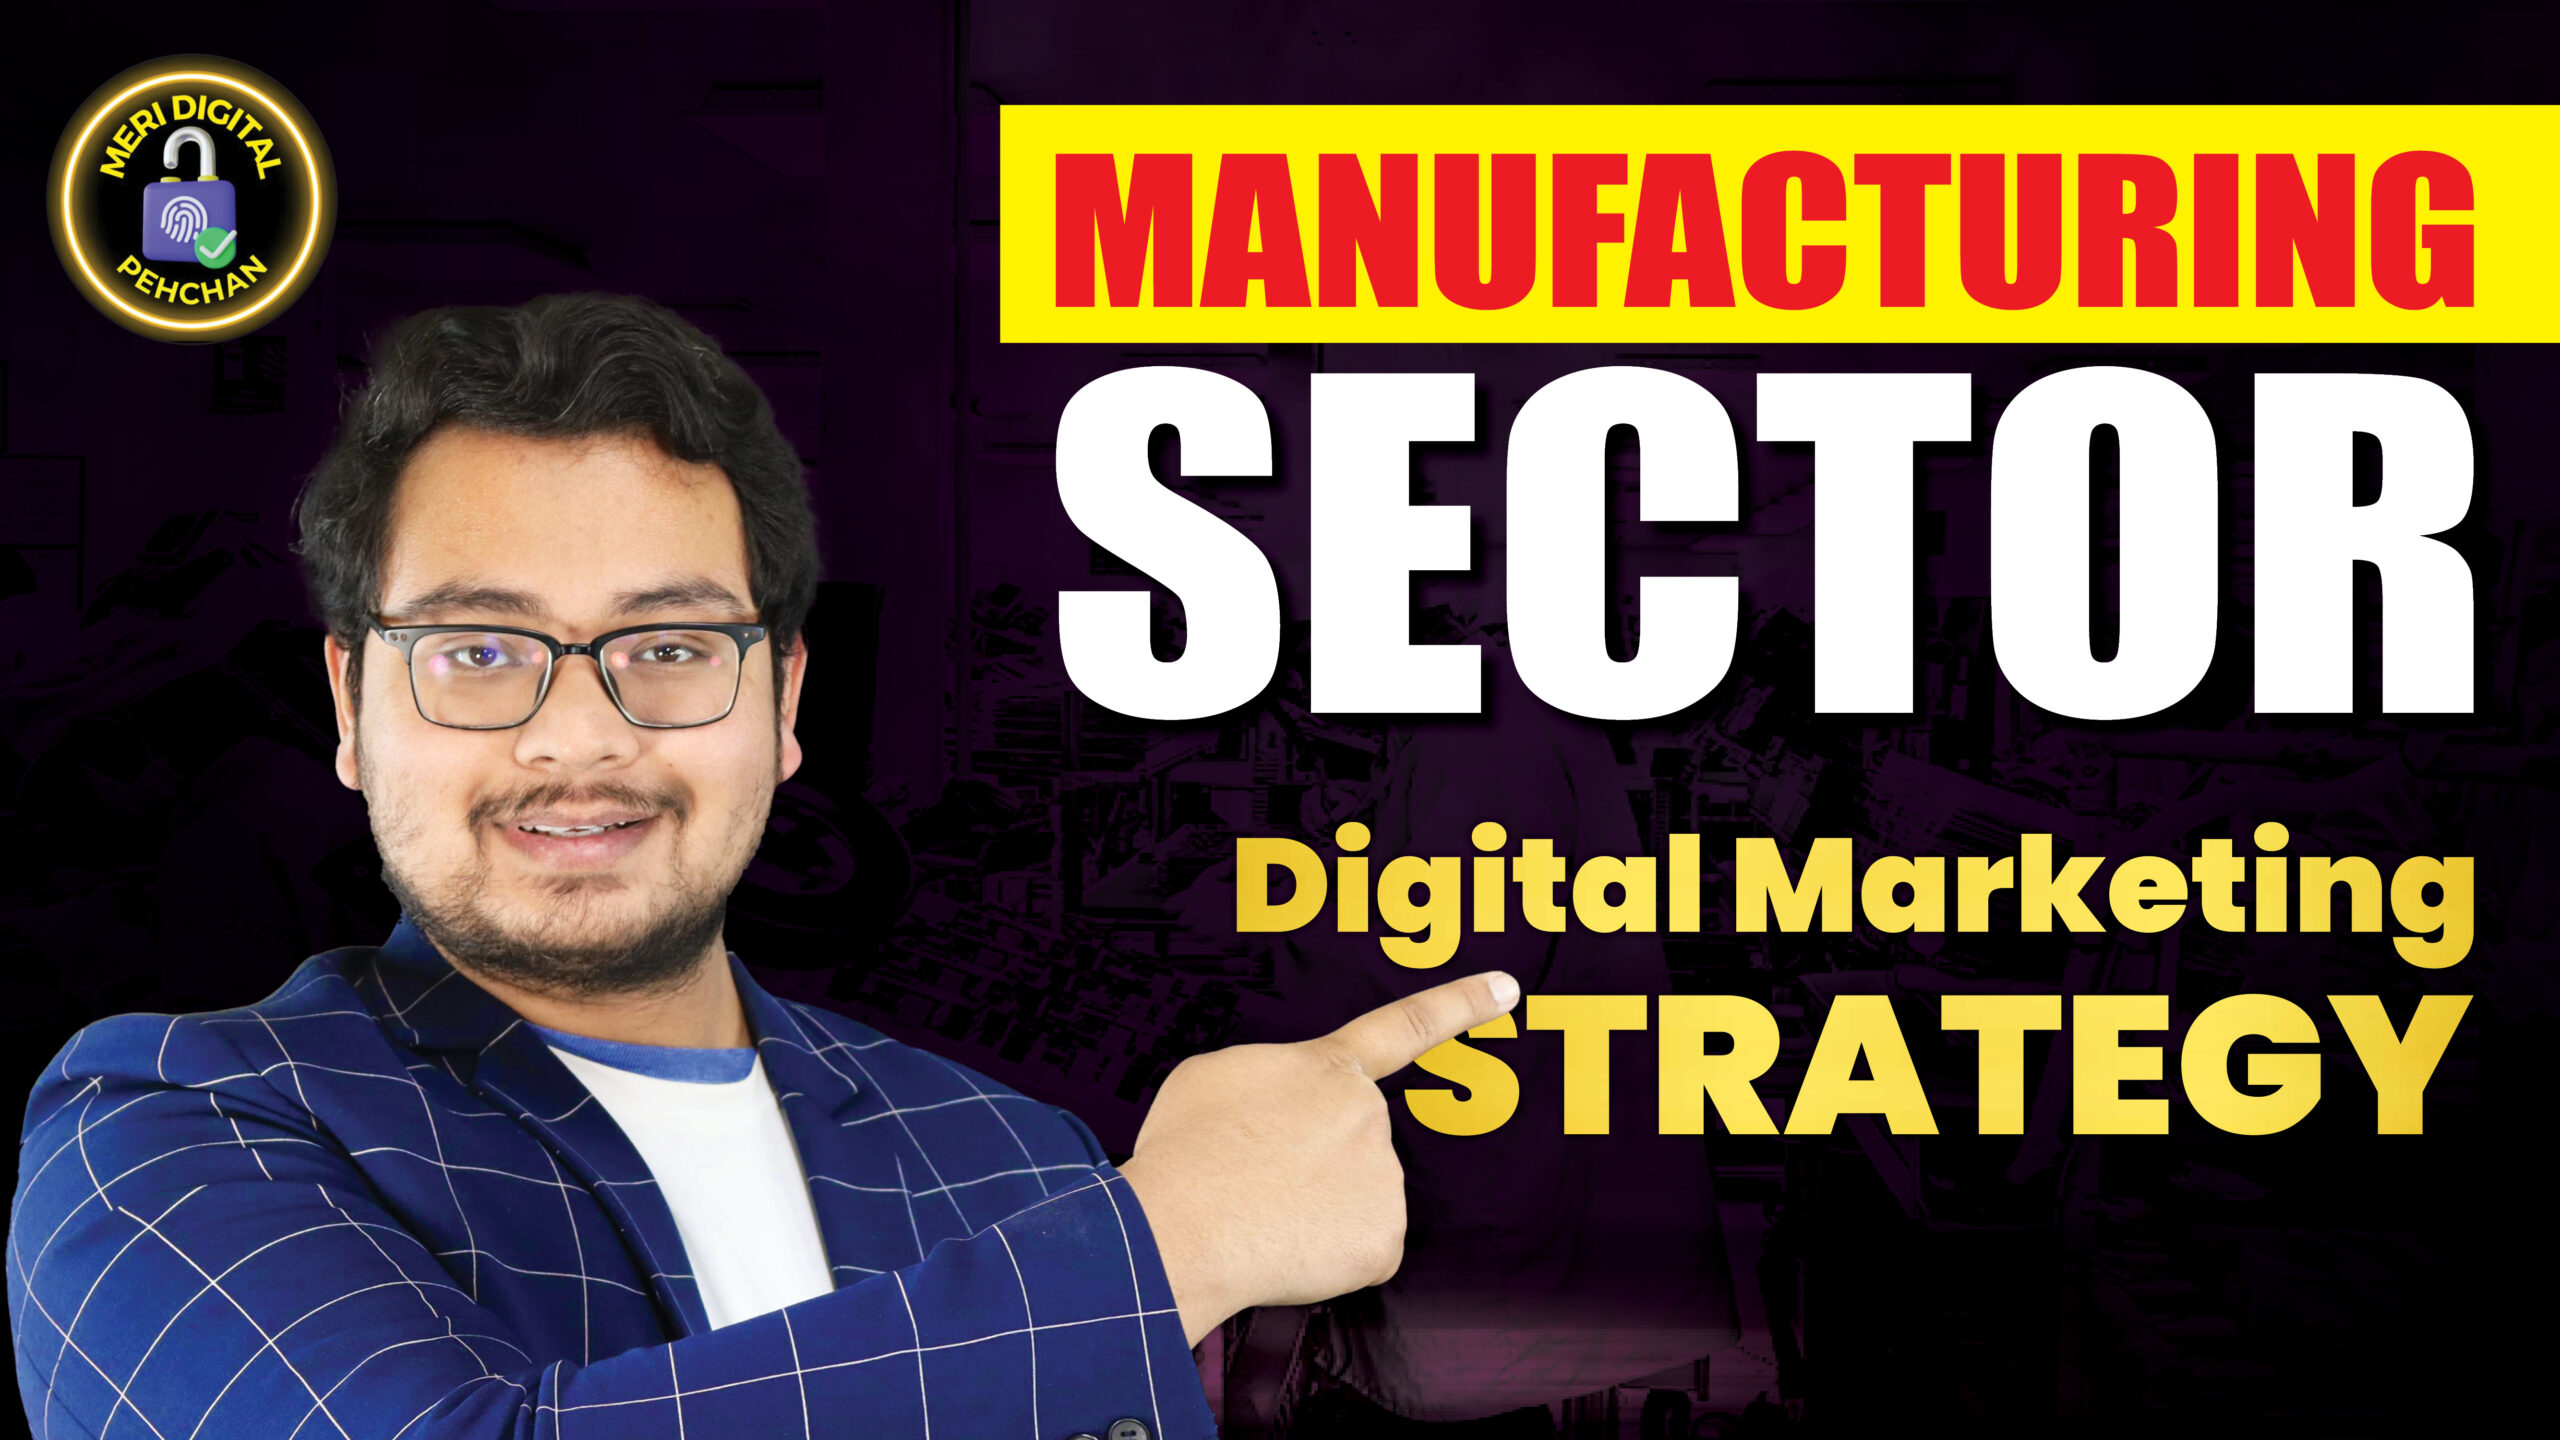 Digital Marketing for Manufacturers & Industry